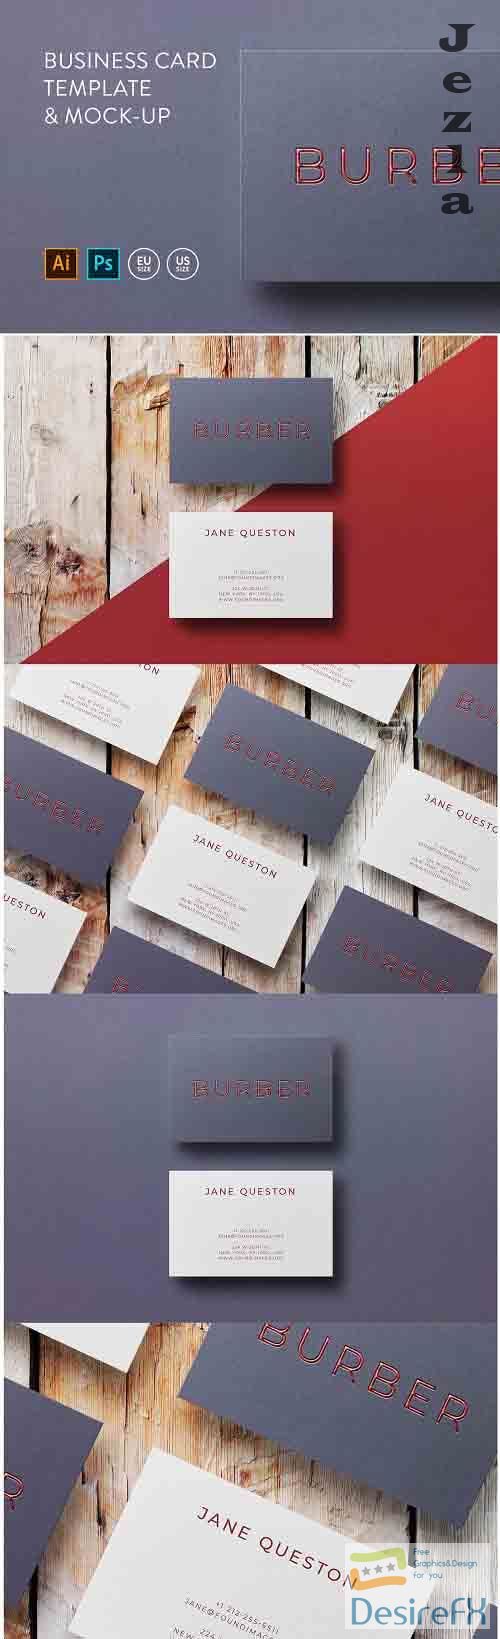 Business card Template & Mock-up #5 - 63944